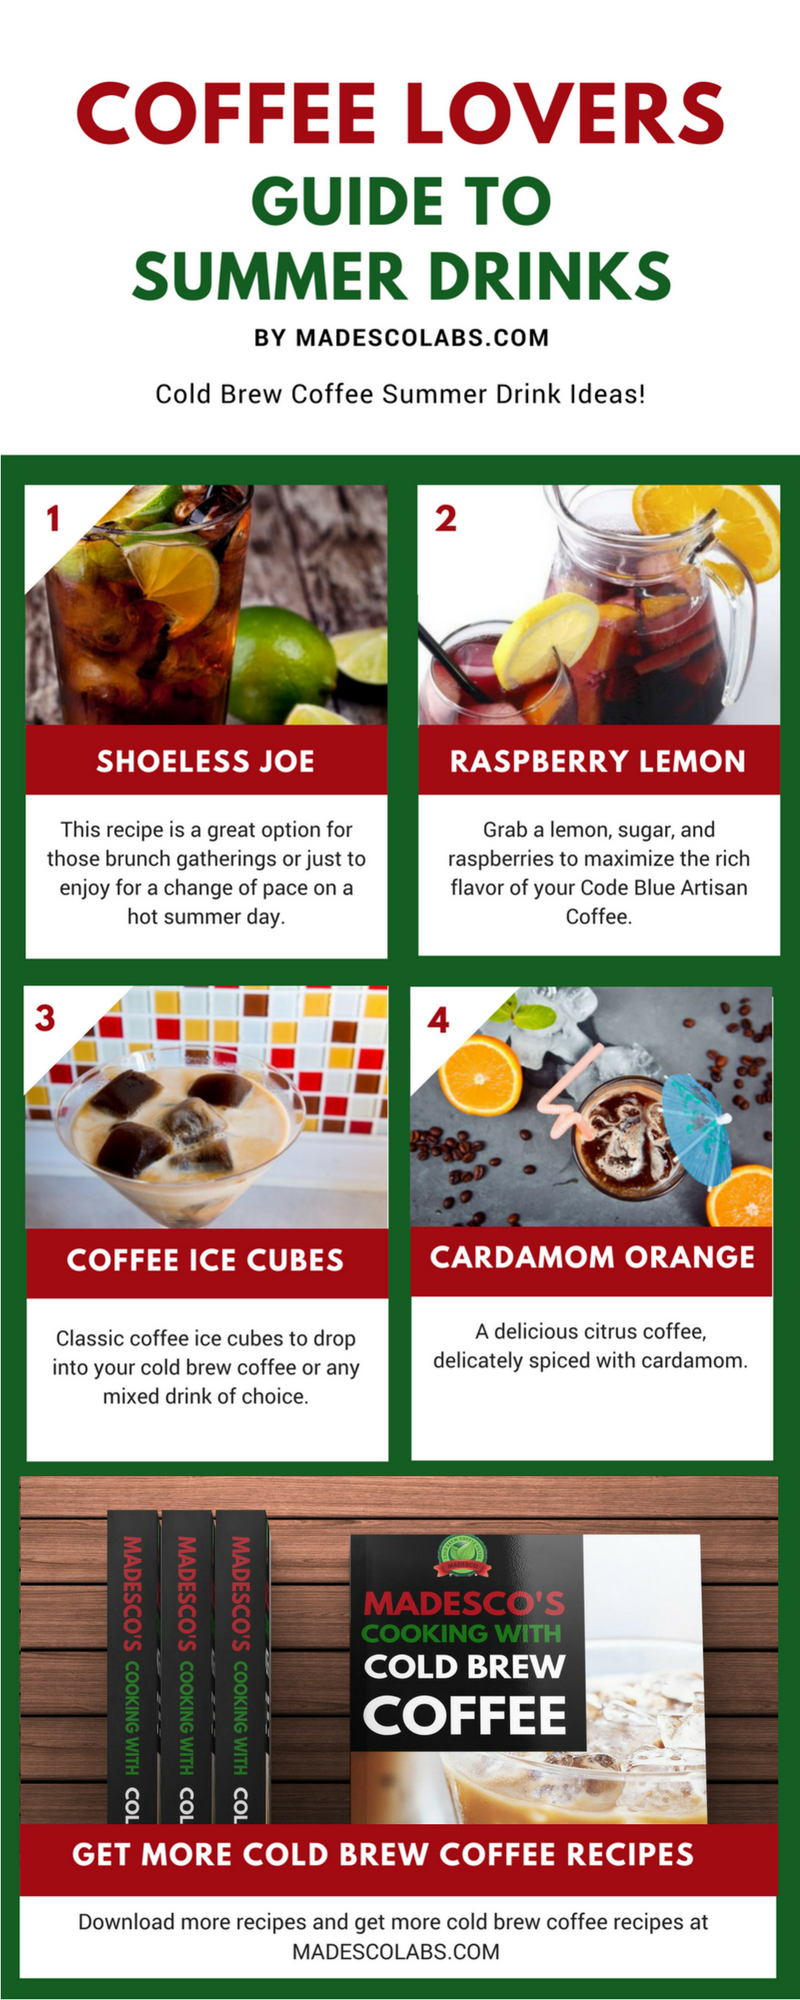 infographic-cold-brew-coffee-summer-treats